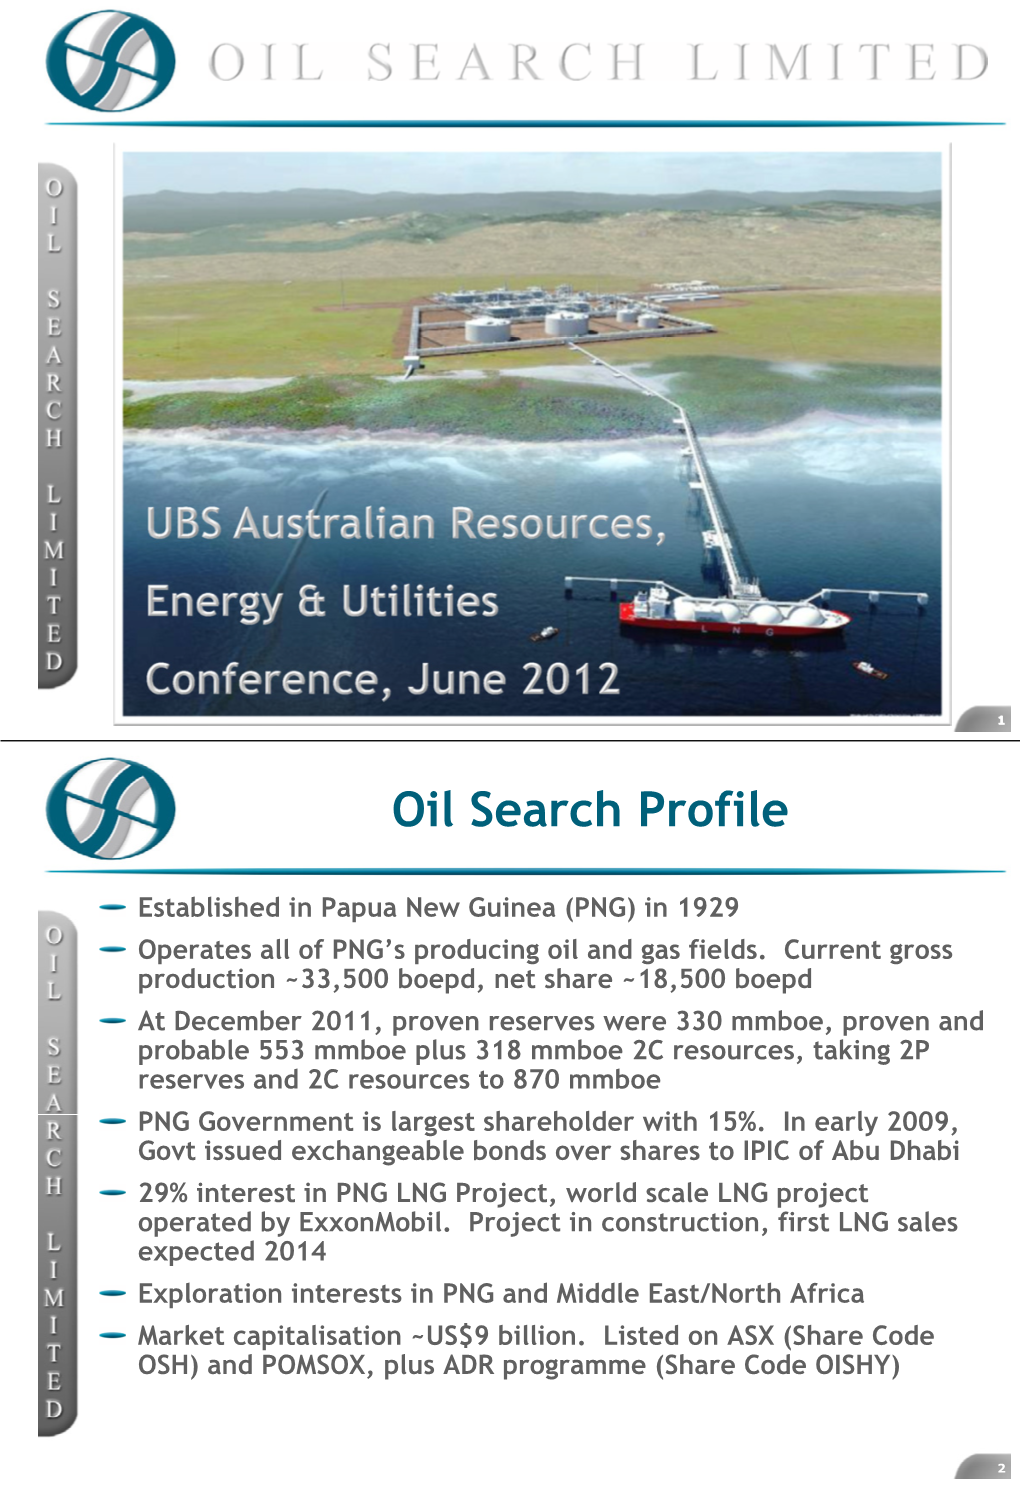 PNG LNG Project, World Scale LNG Project Operated by Exxonmobil